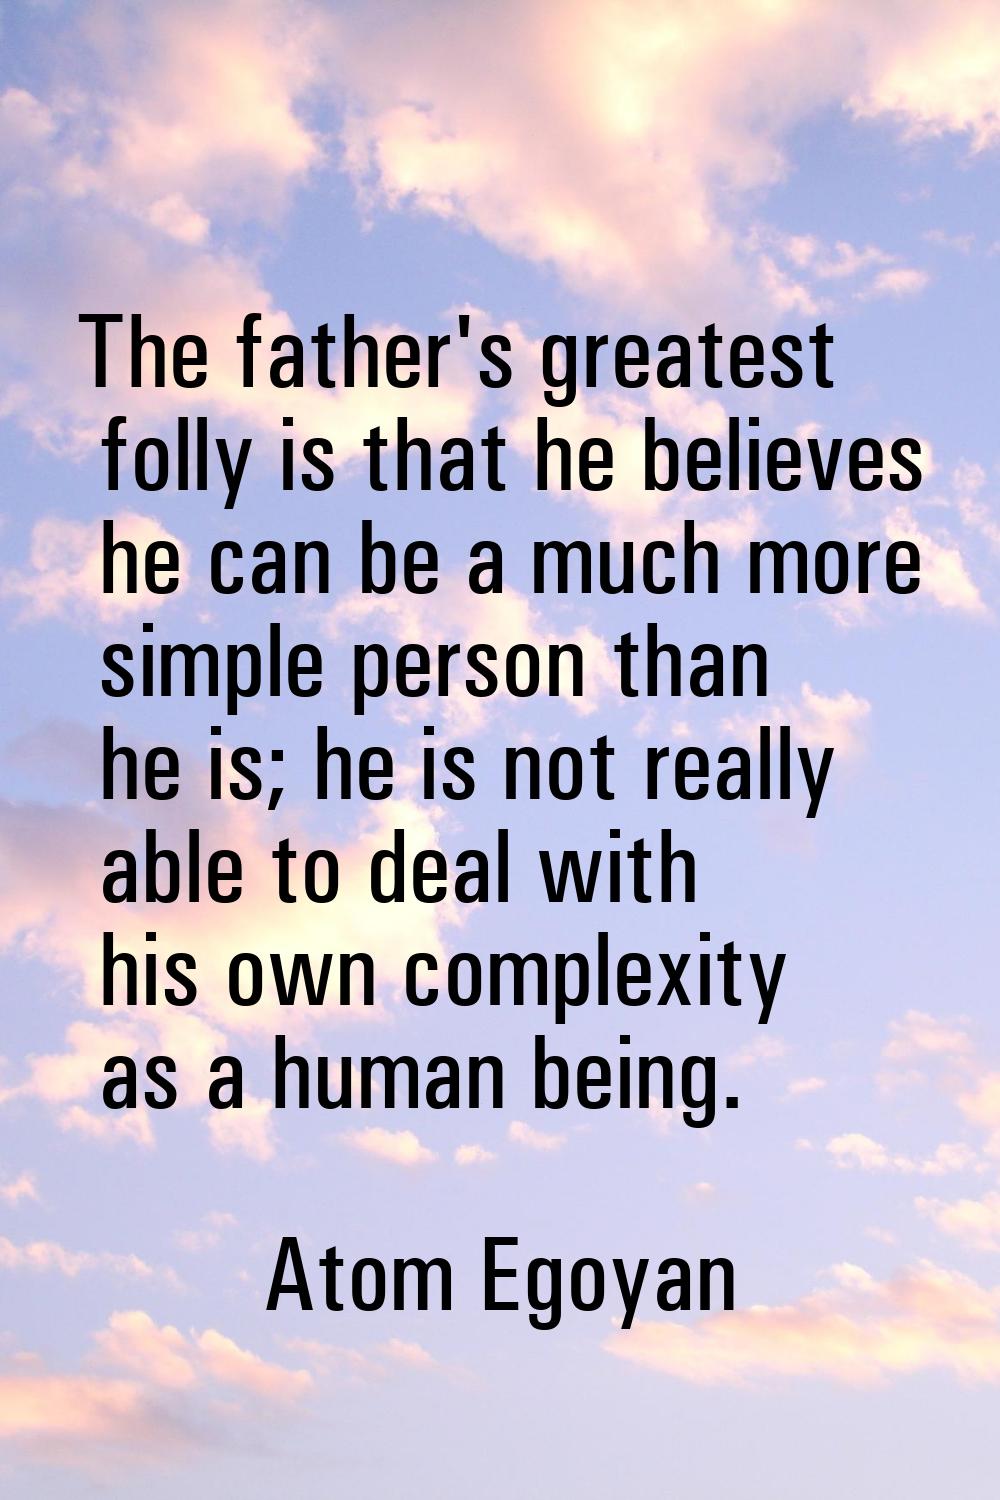 The father's greatest folly is that he believes he can be a much more simple person than he is; he 